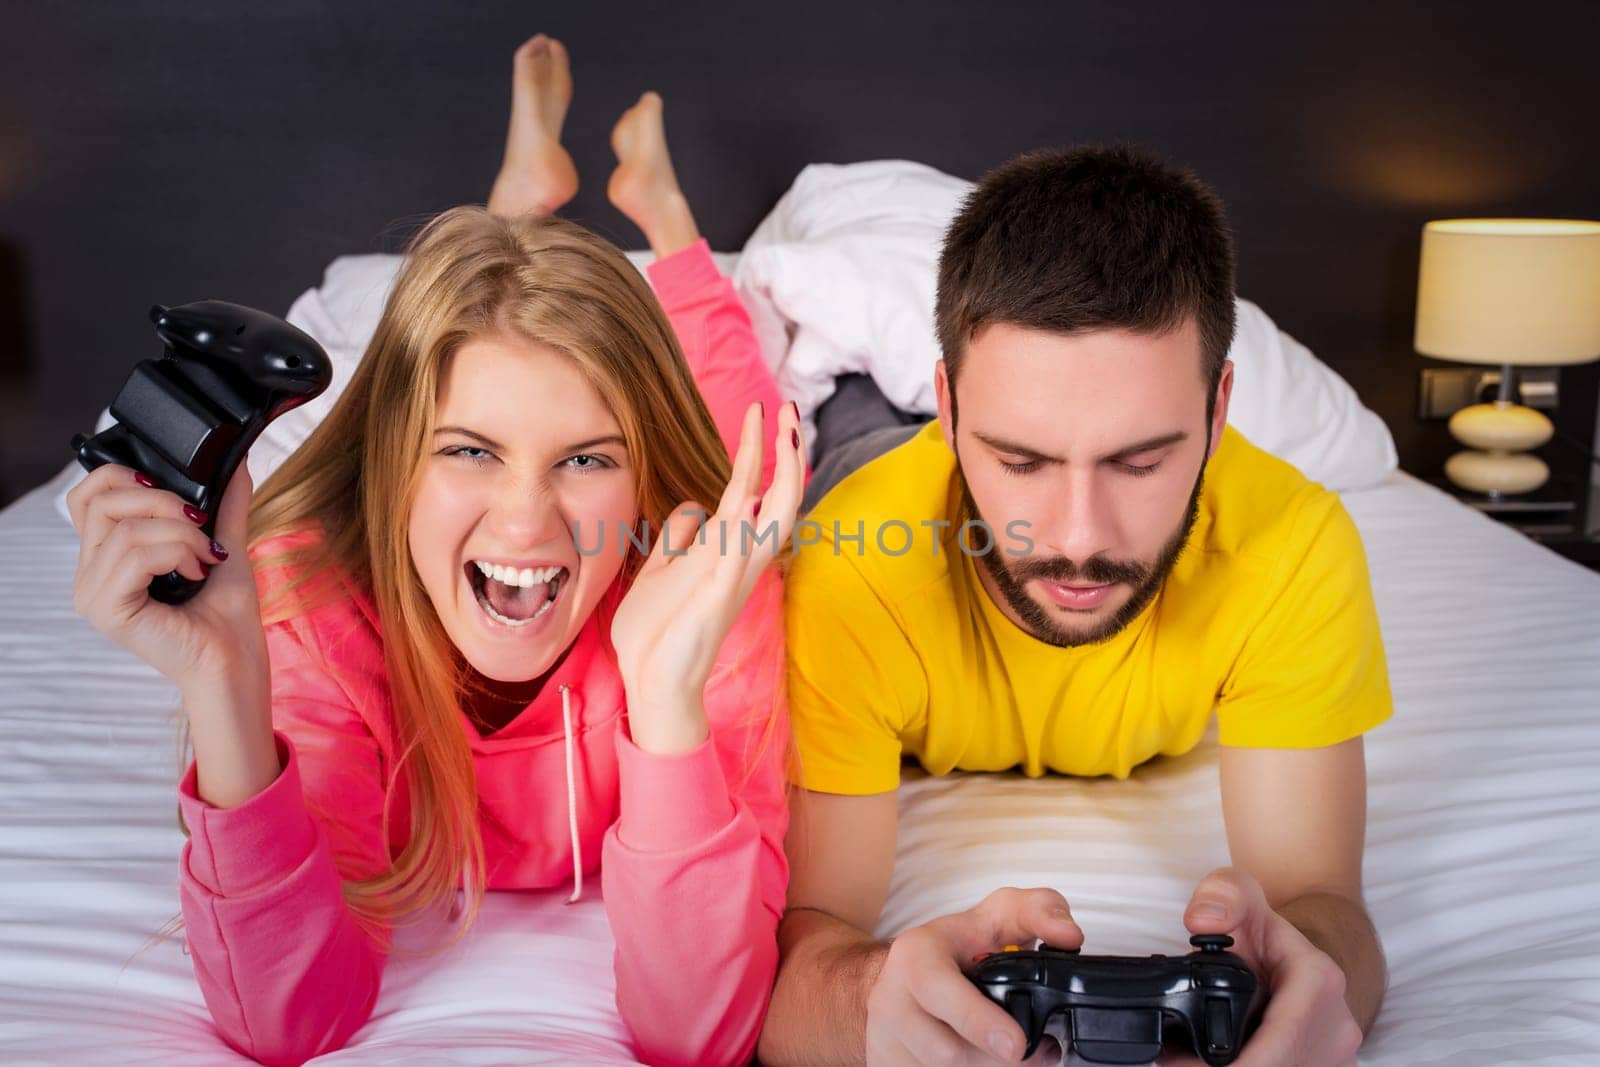 Young couple having fun playing videogames in bed.